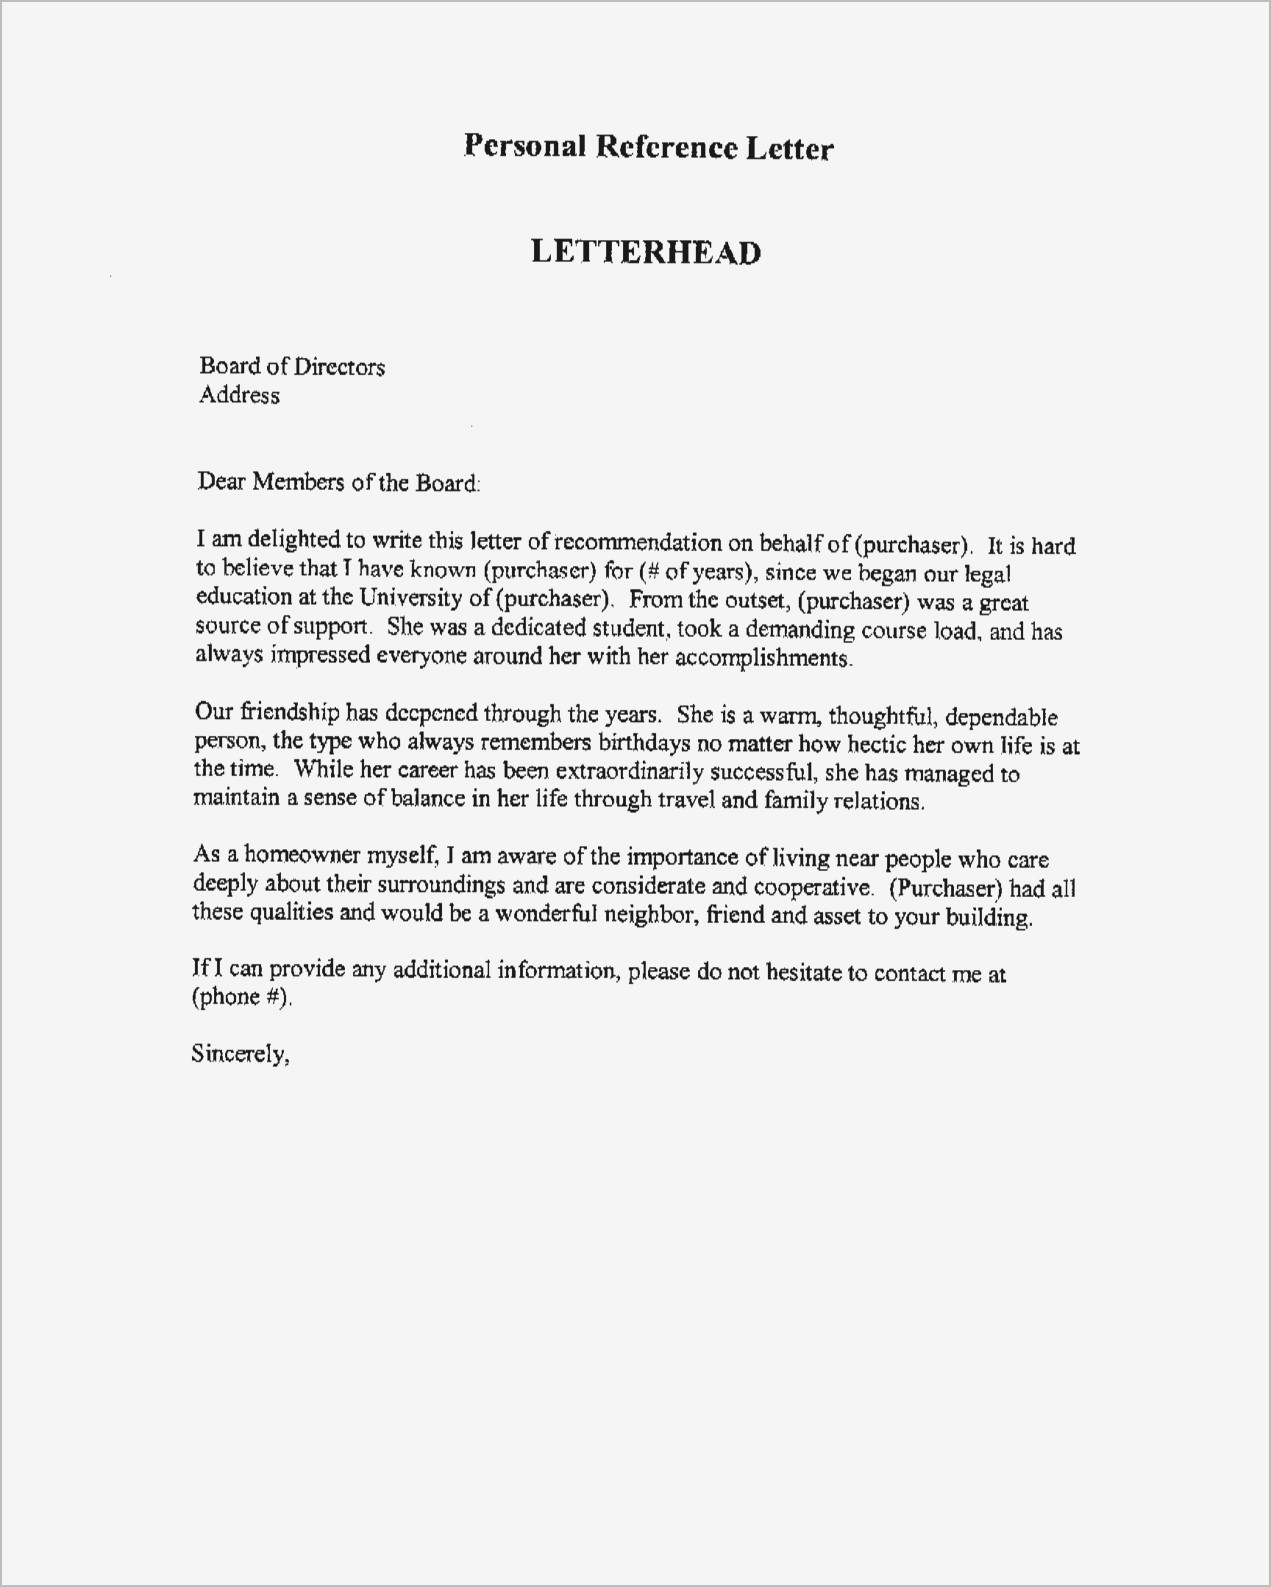 Personal Letter Of Recommendation for A Friend Template - Job Reference Letter Re Mendation Template Fresh Re Mendation